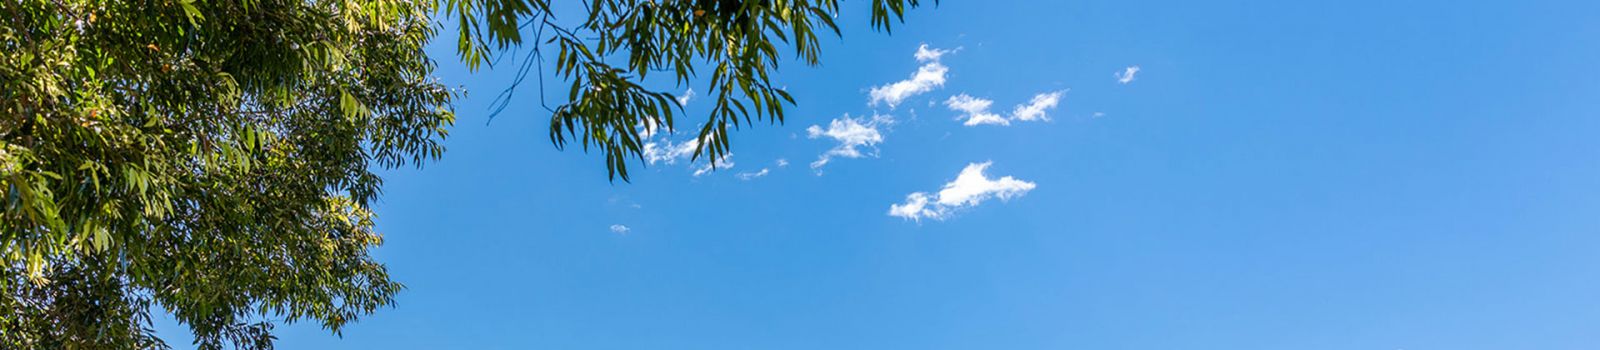 Image of the trees and a blue sky with a couple of clouds  banner image